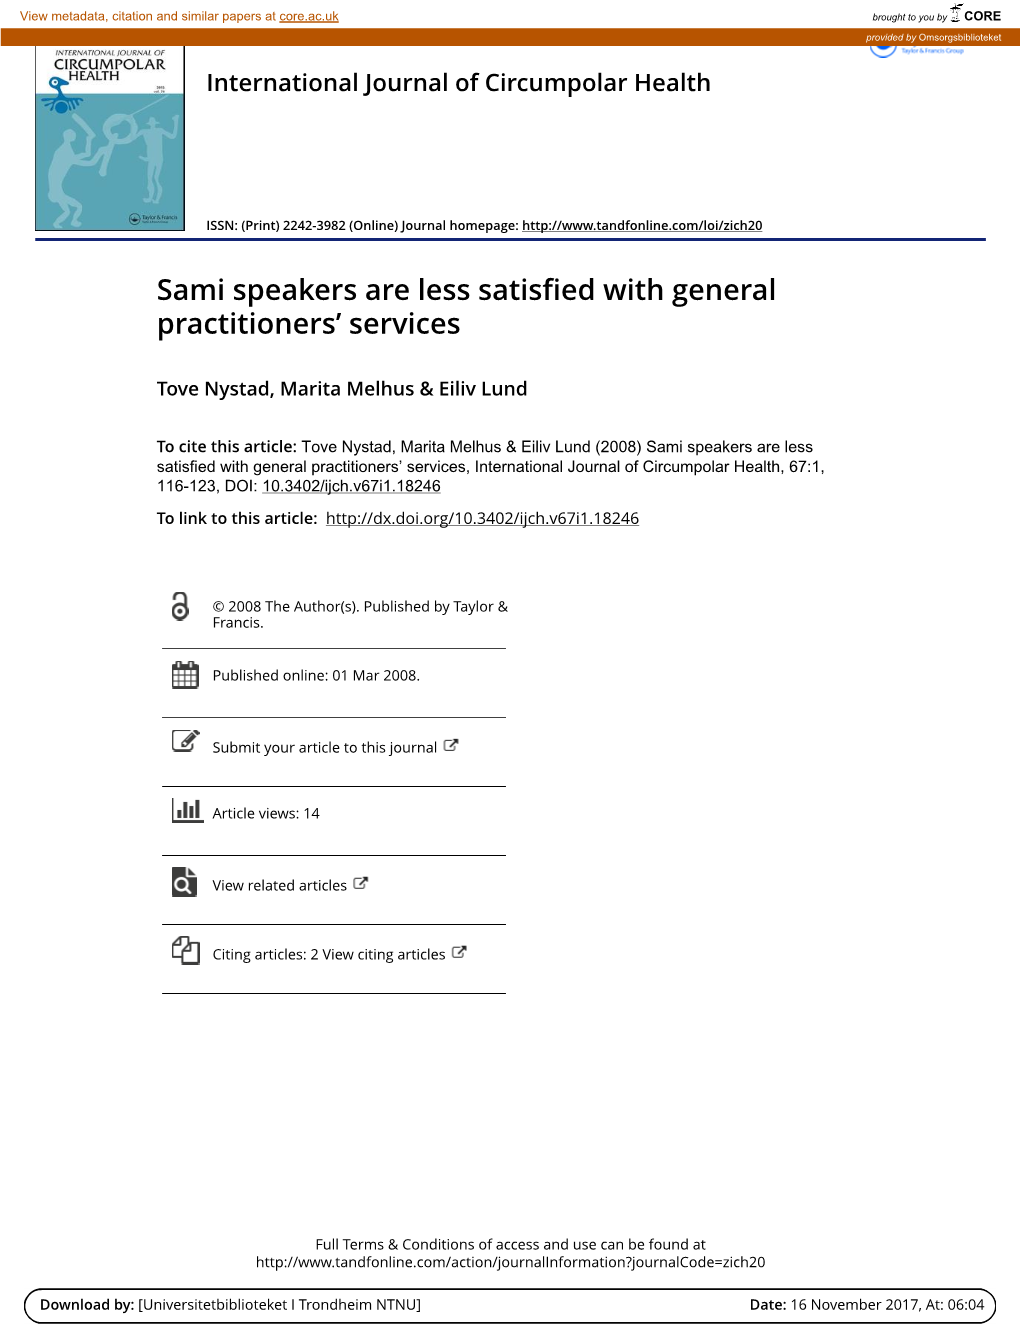 Sami Speakers Are Less Satisfied with General Practitioners' Services